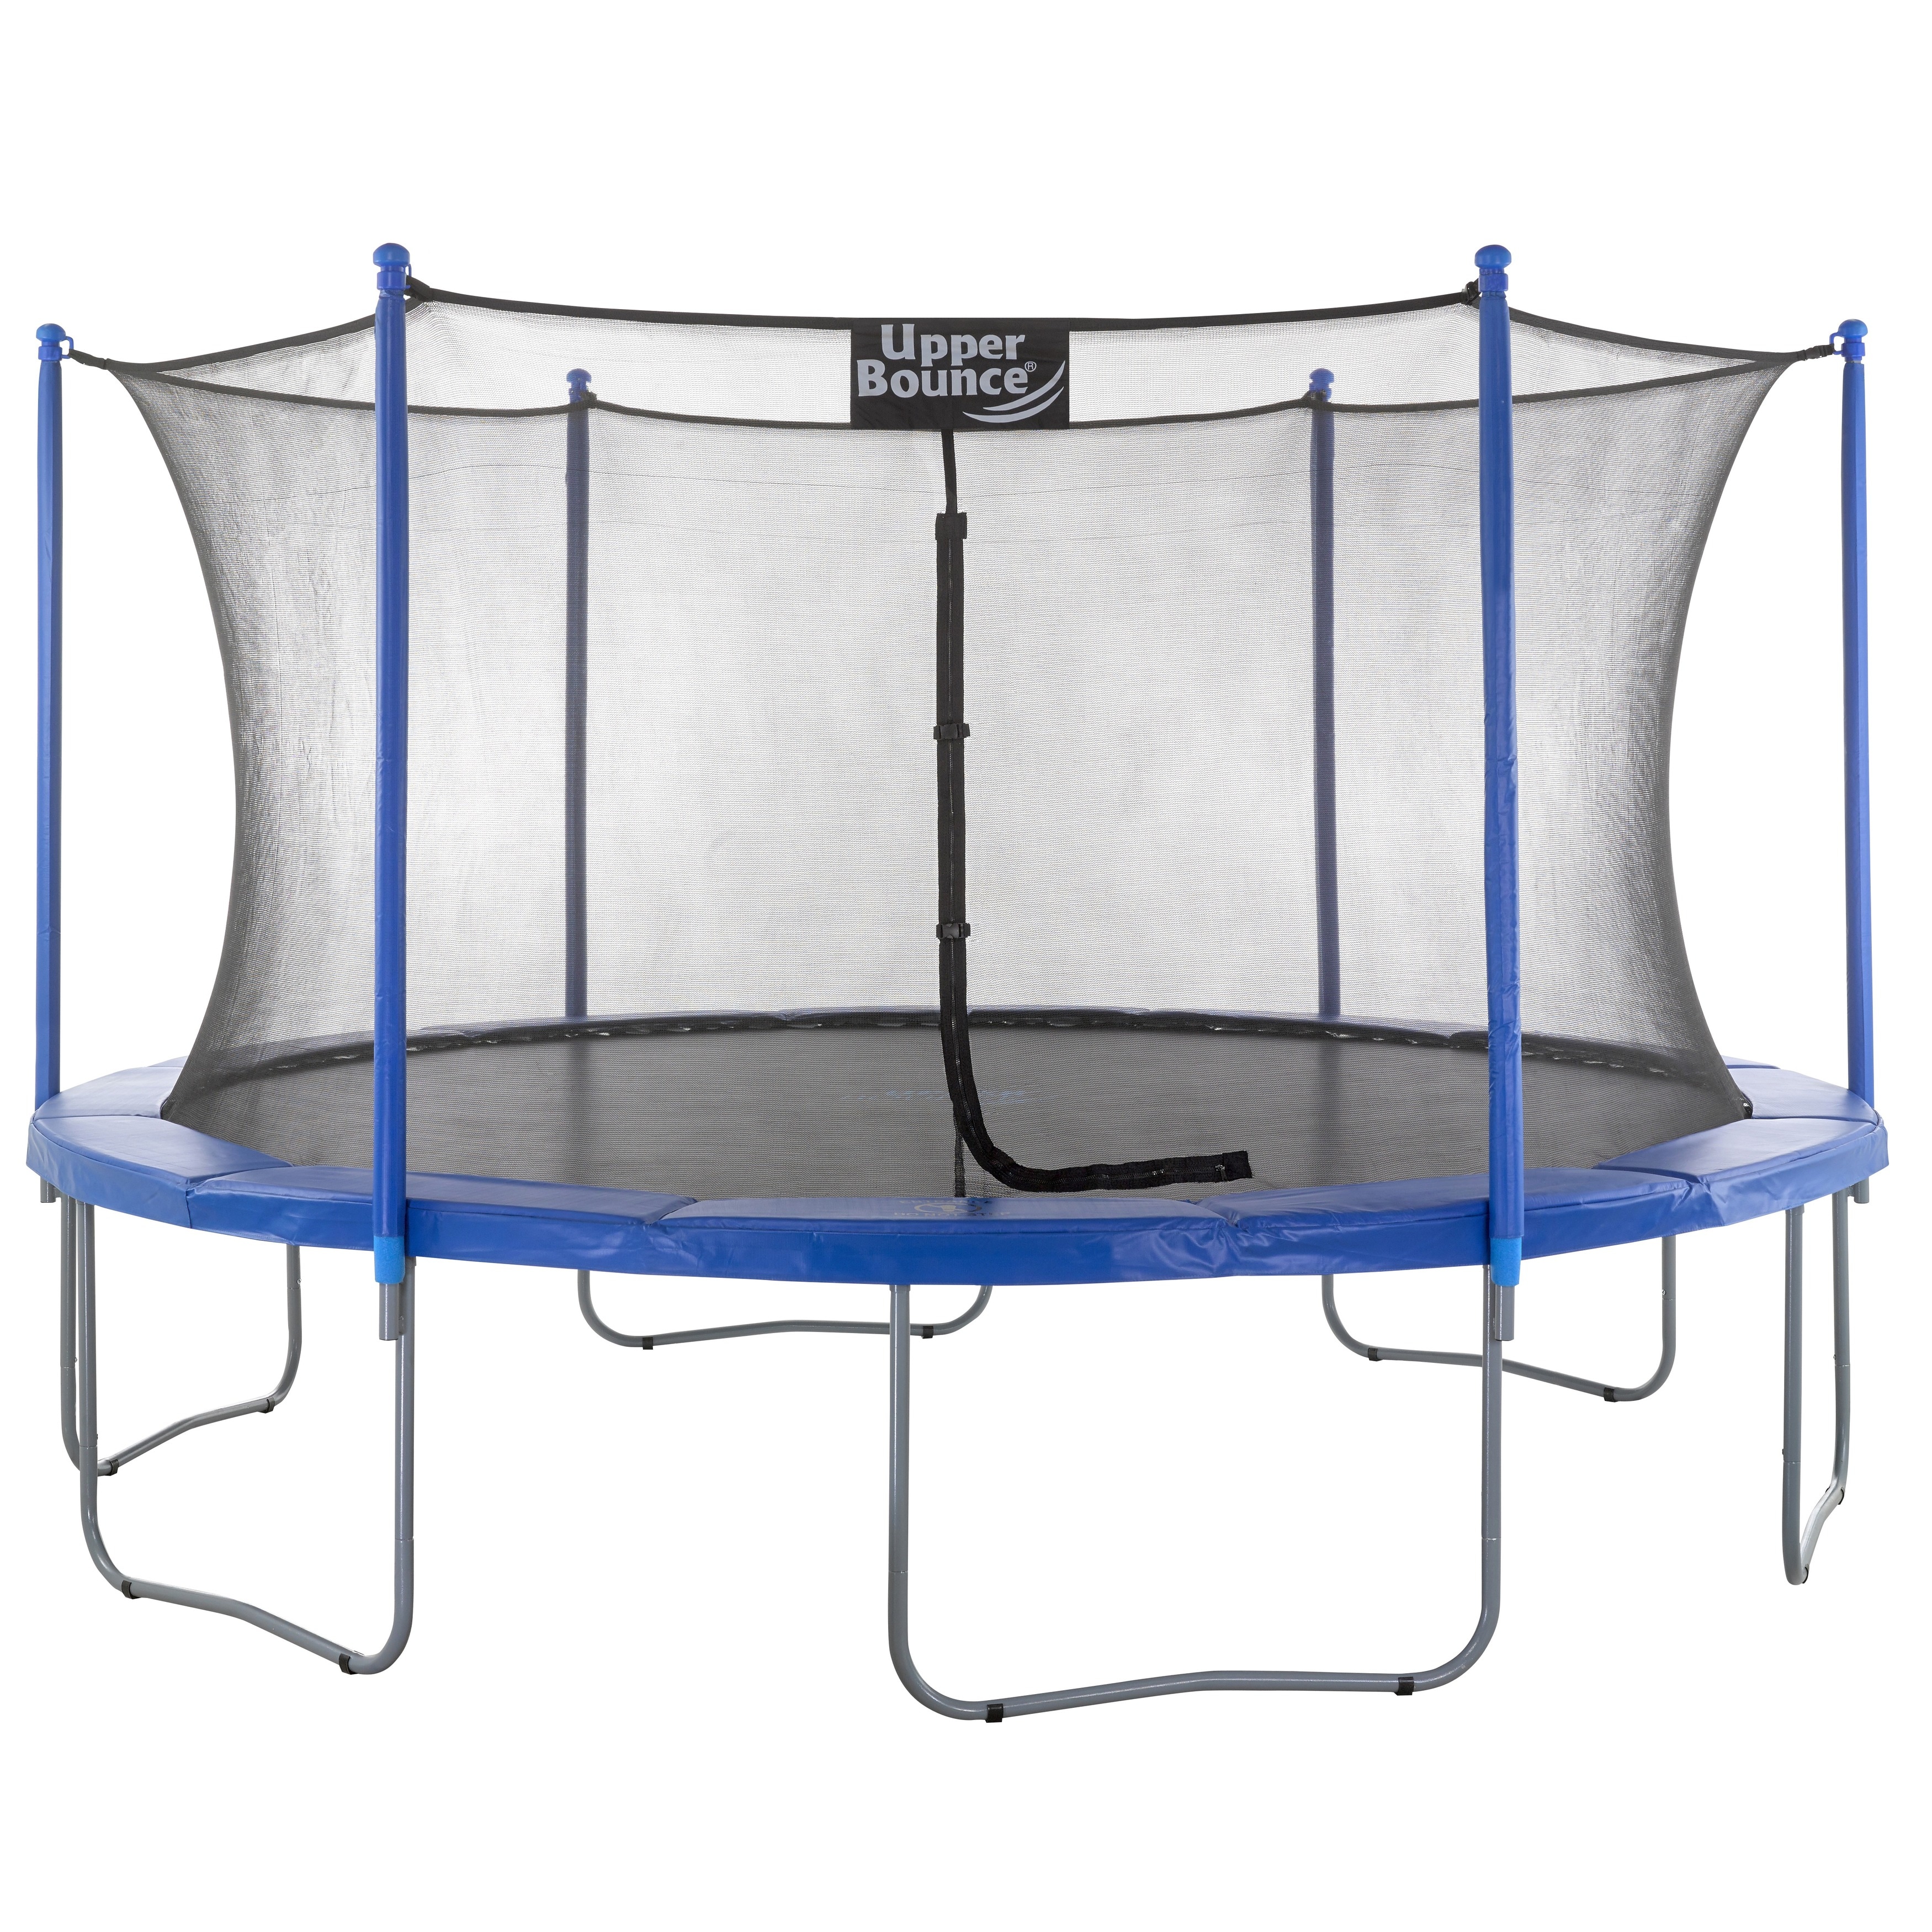 Upper Bounce Trampoline and Enclosure Set with Easy Assemble (15 foot